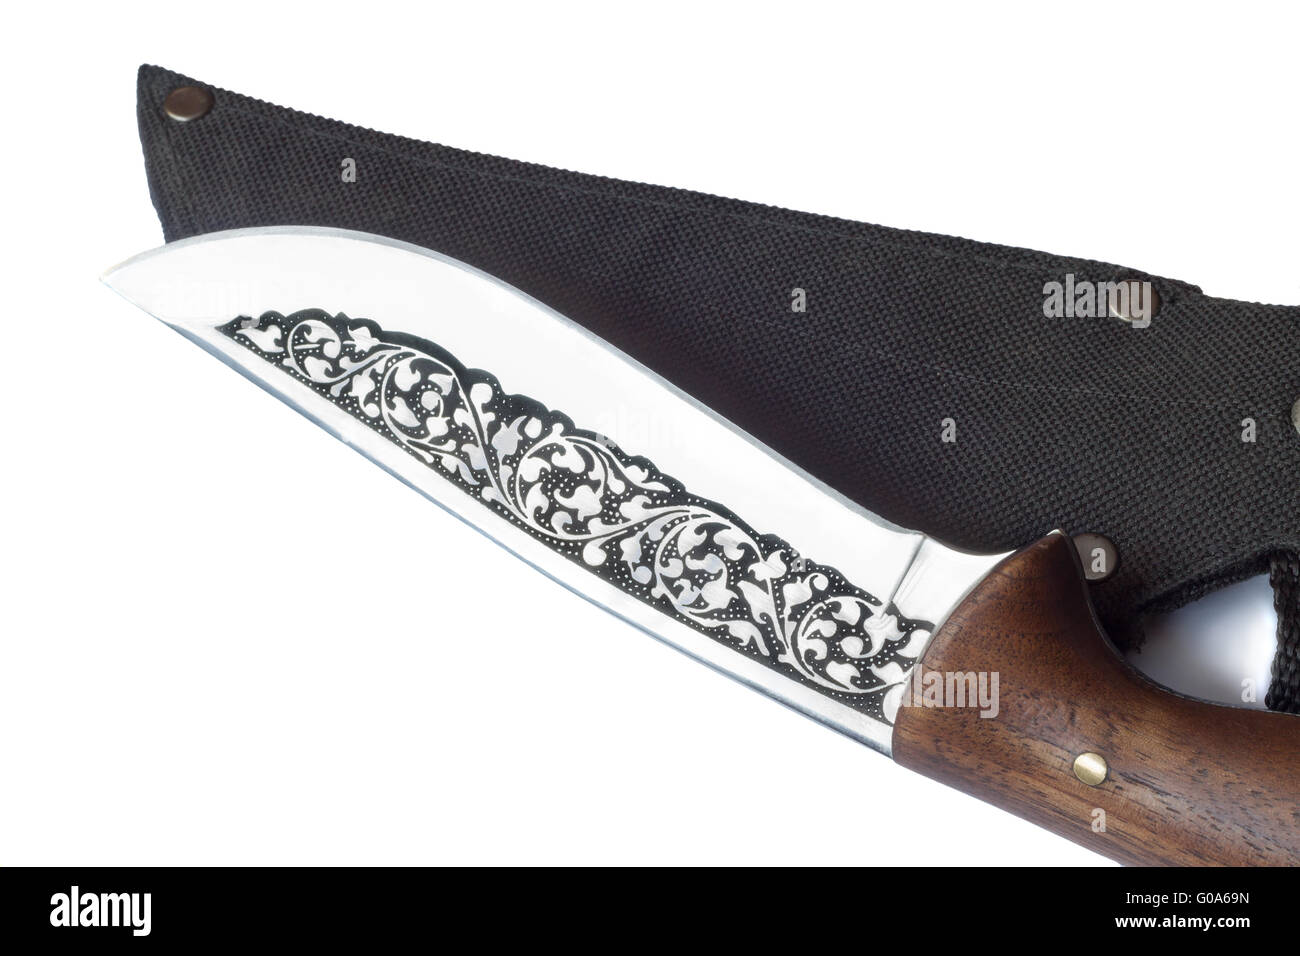 eautiful hunting knife and a case for the knife. Stock Photo